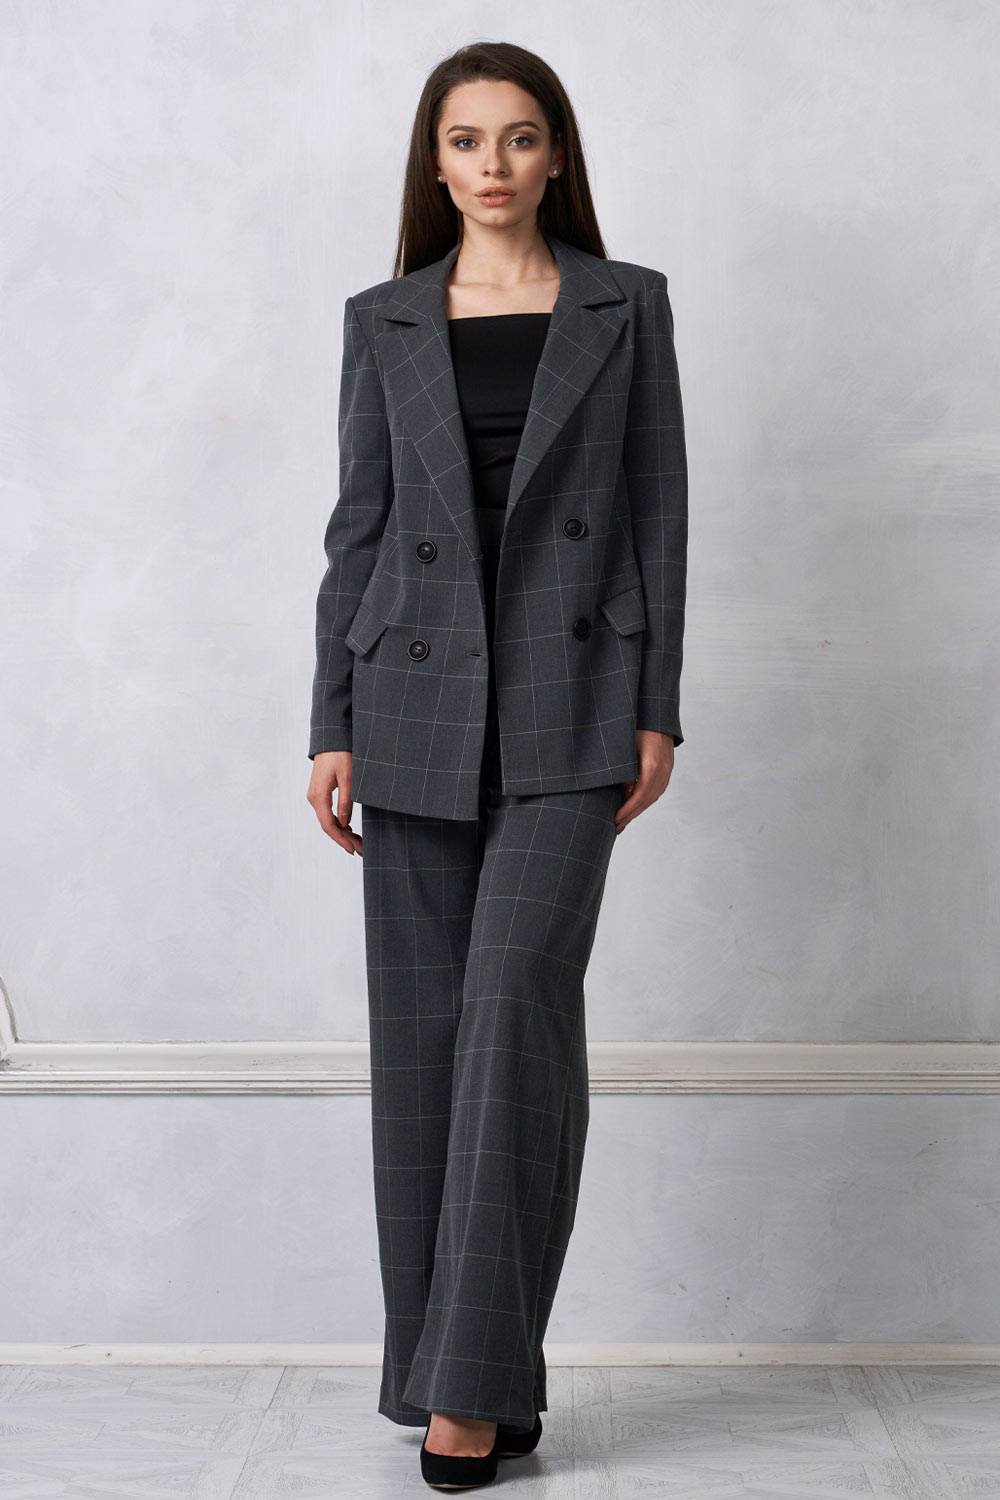 Grey Colored Work Suit